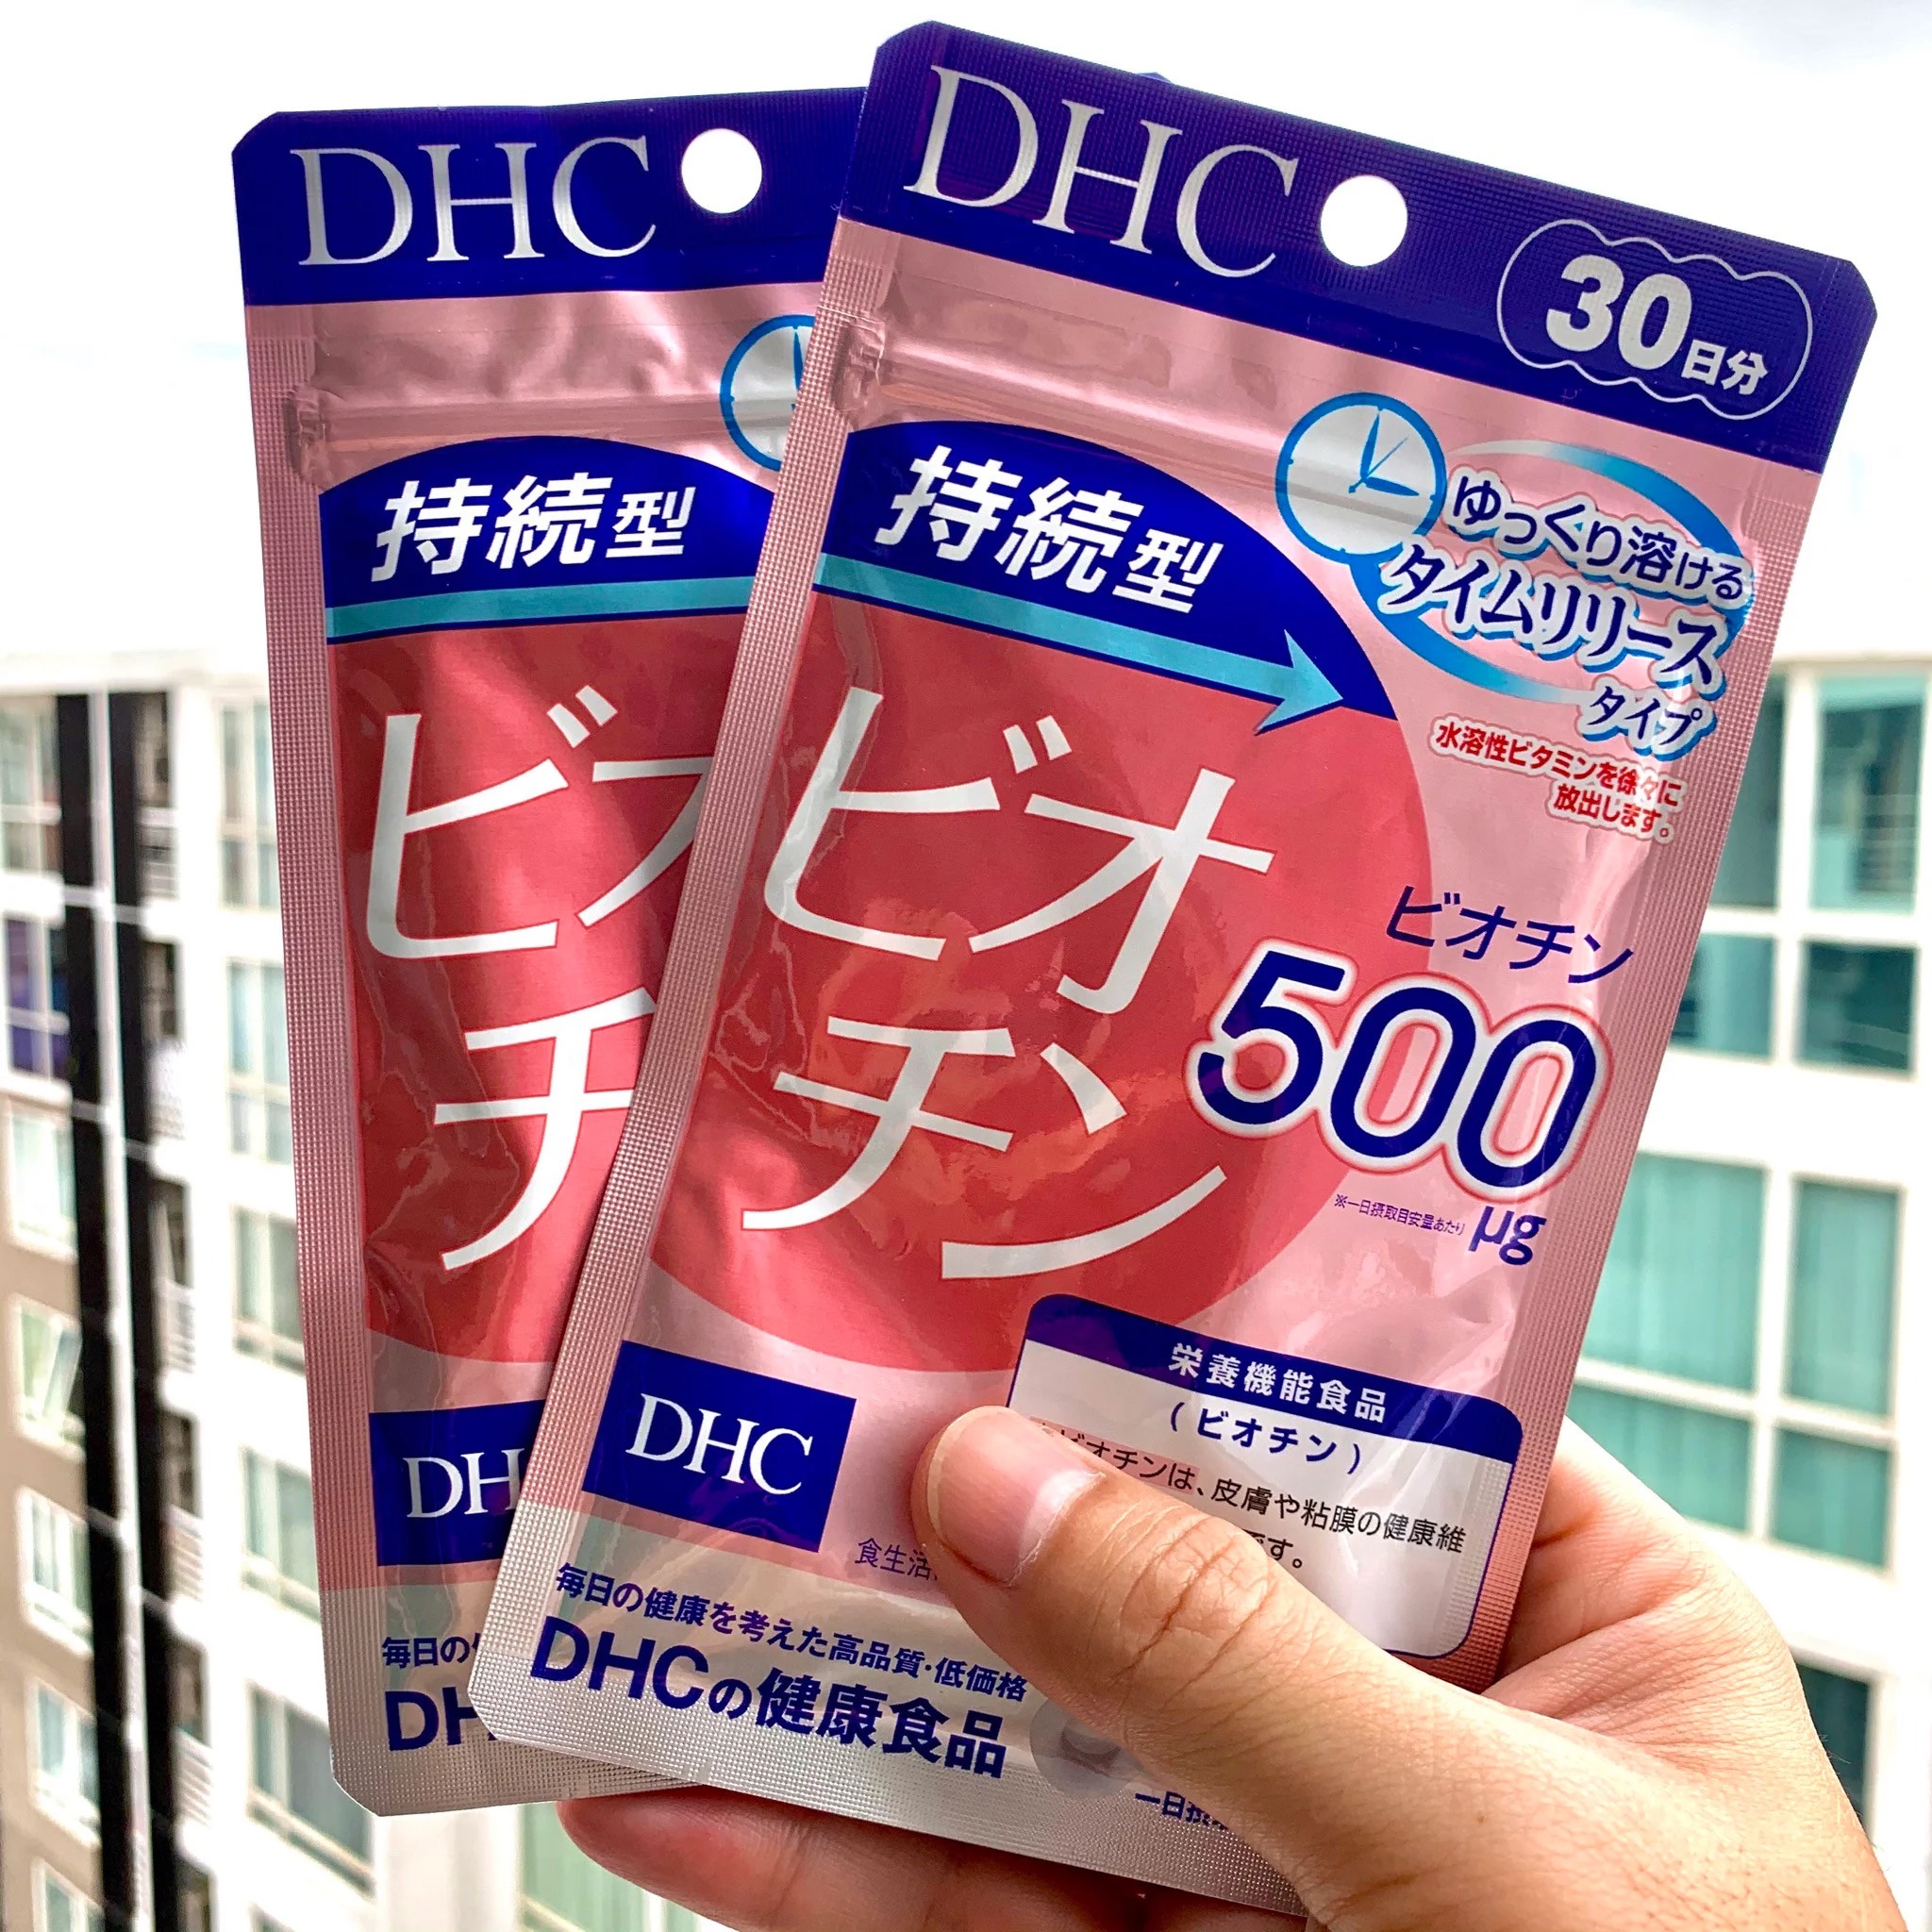 dhc biotin sustained release nhat ban